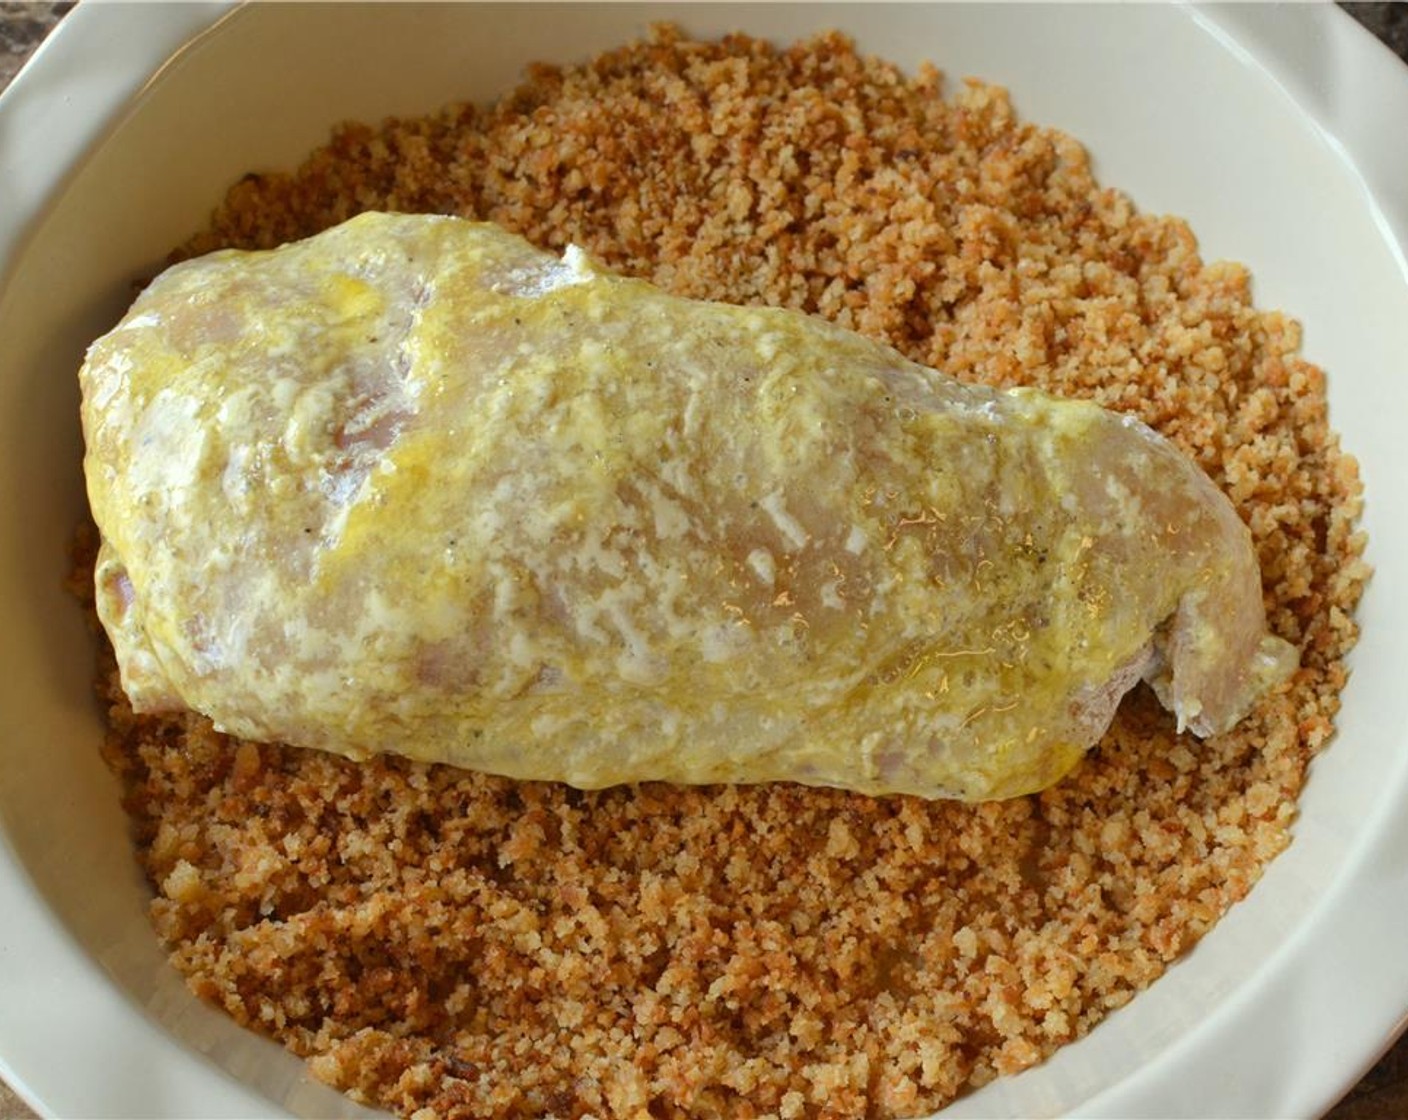 step 10 Working with one stuffed chicken breast at a time, coat the chicken lightly with flour, then dip the chicken in the egg and lastly in the bread crumbs. Make sure you're covering both sides.